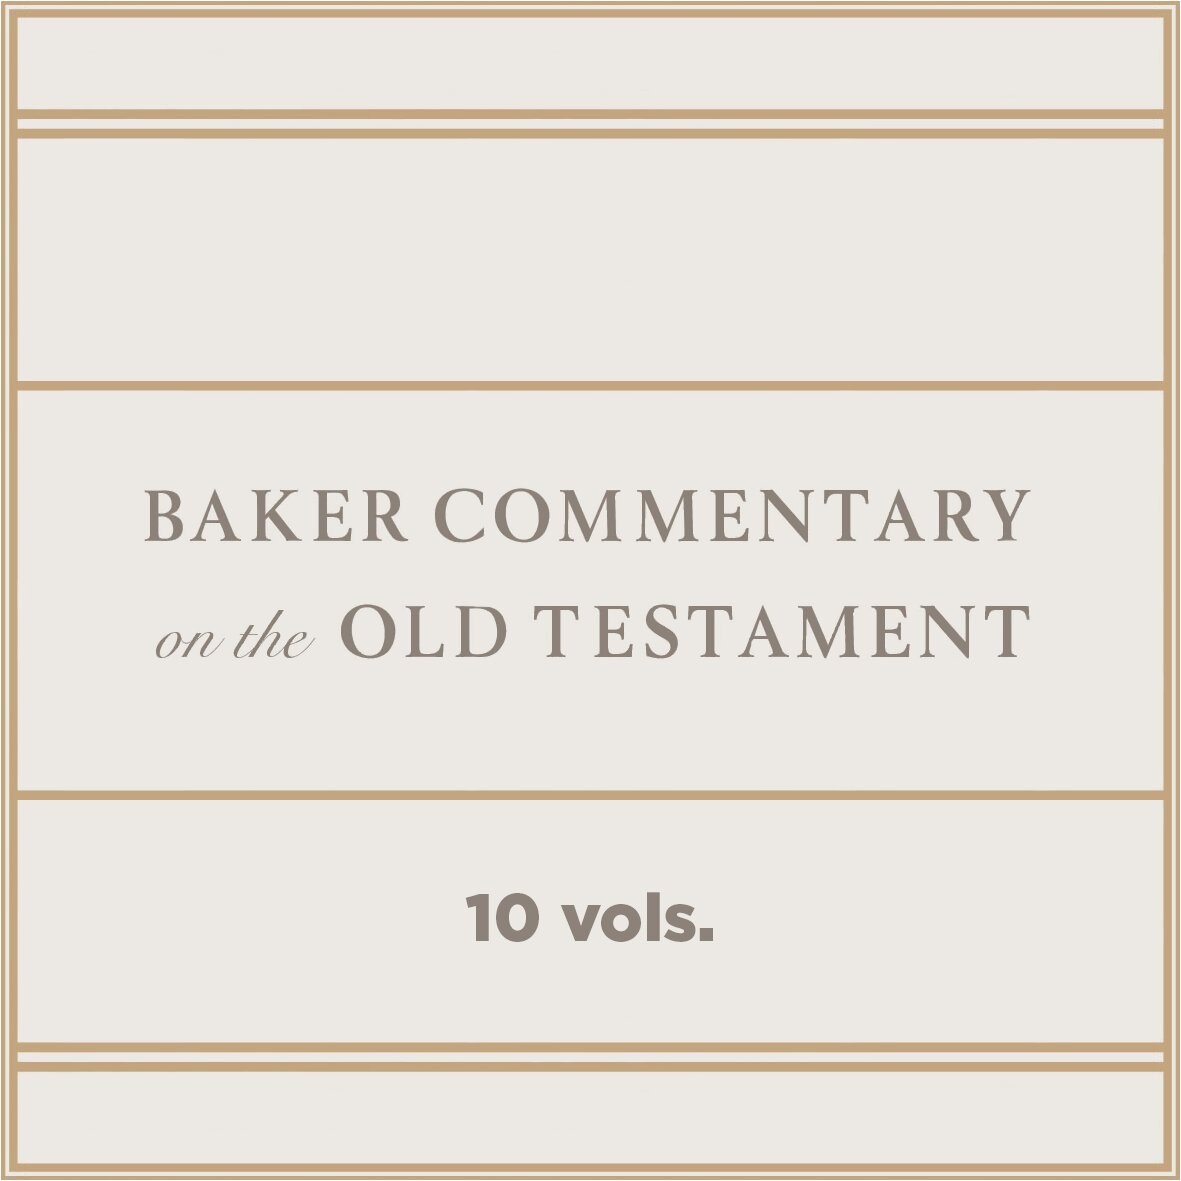 Baker Commentary on the Old Testament (10 vols.)